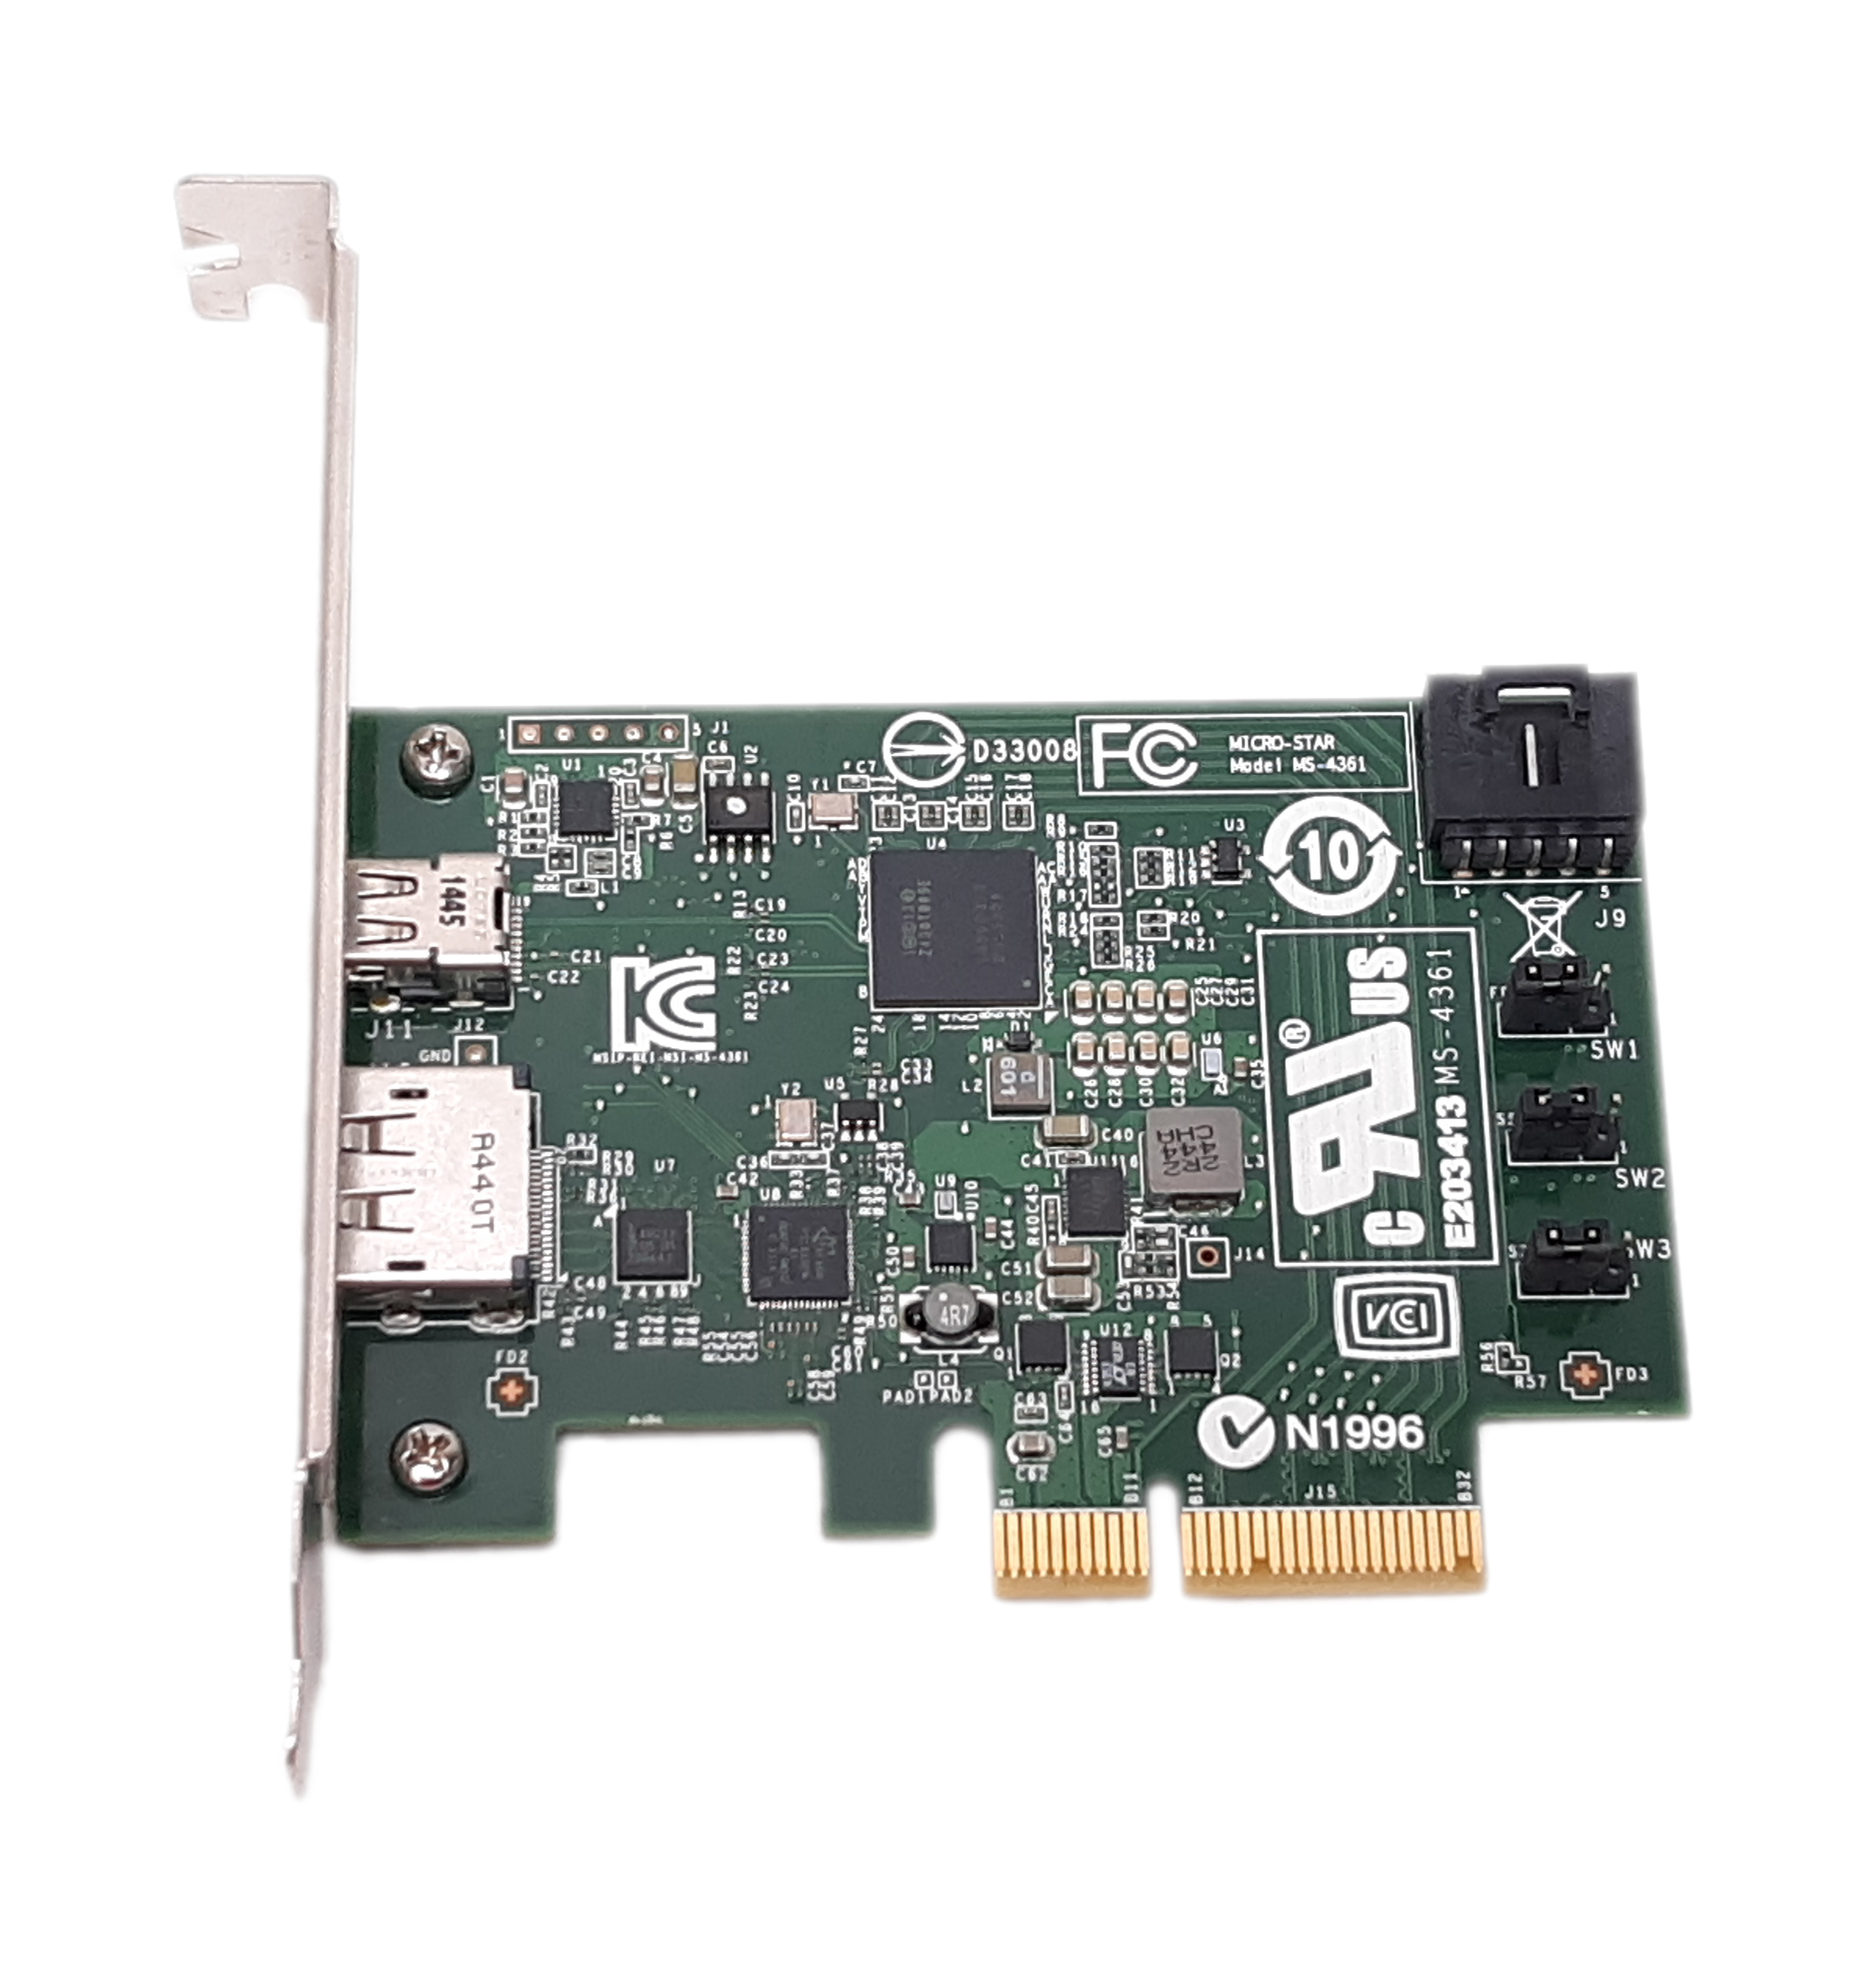 Dell Micro-Star MS-4361 Thunderbolt-2 Adapter DP to mini-DP PCIe x4 7HMHP